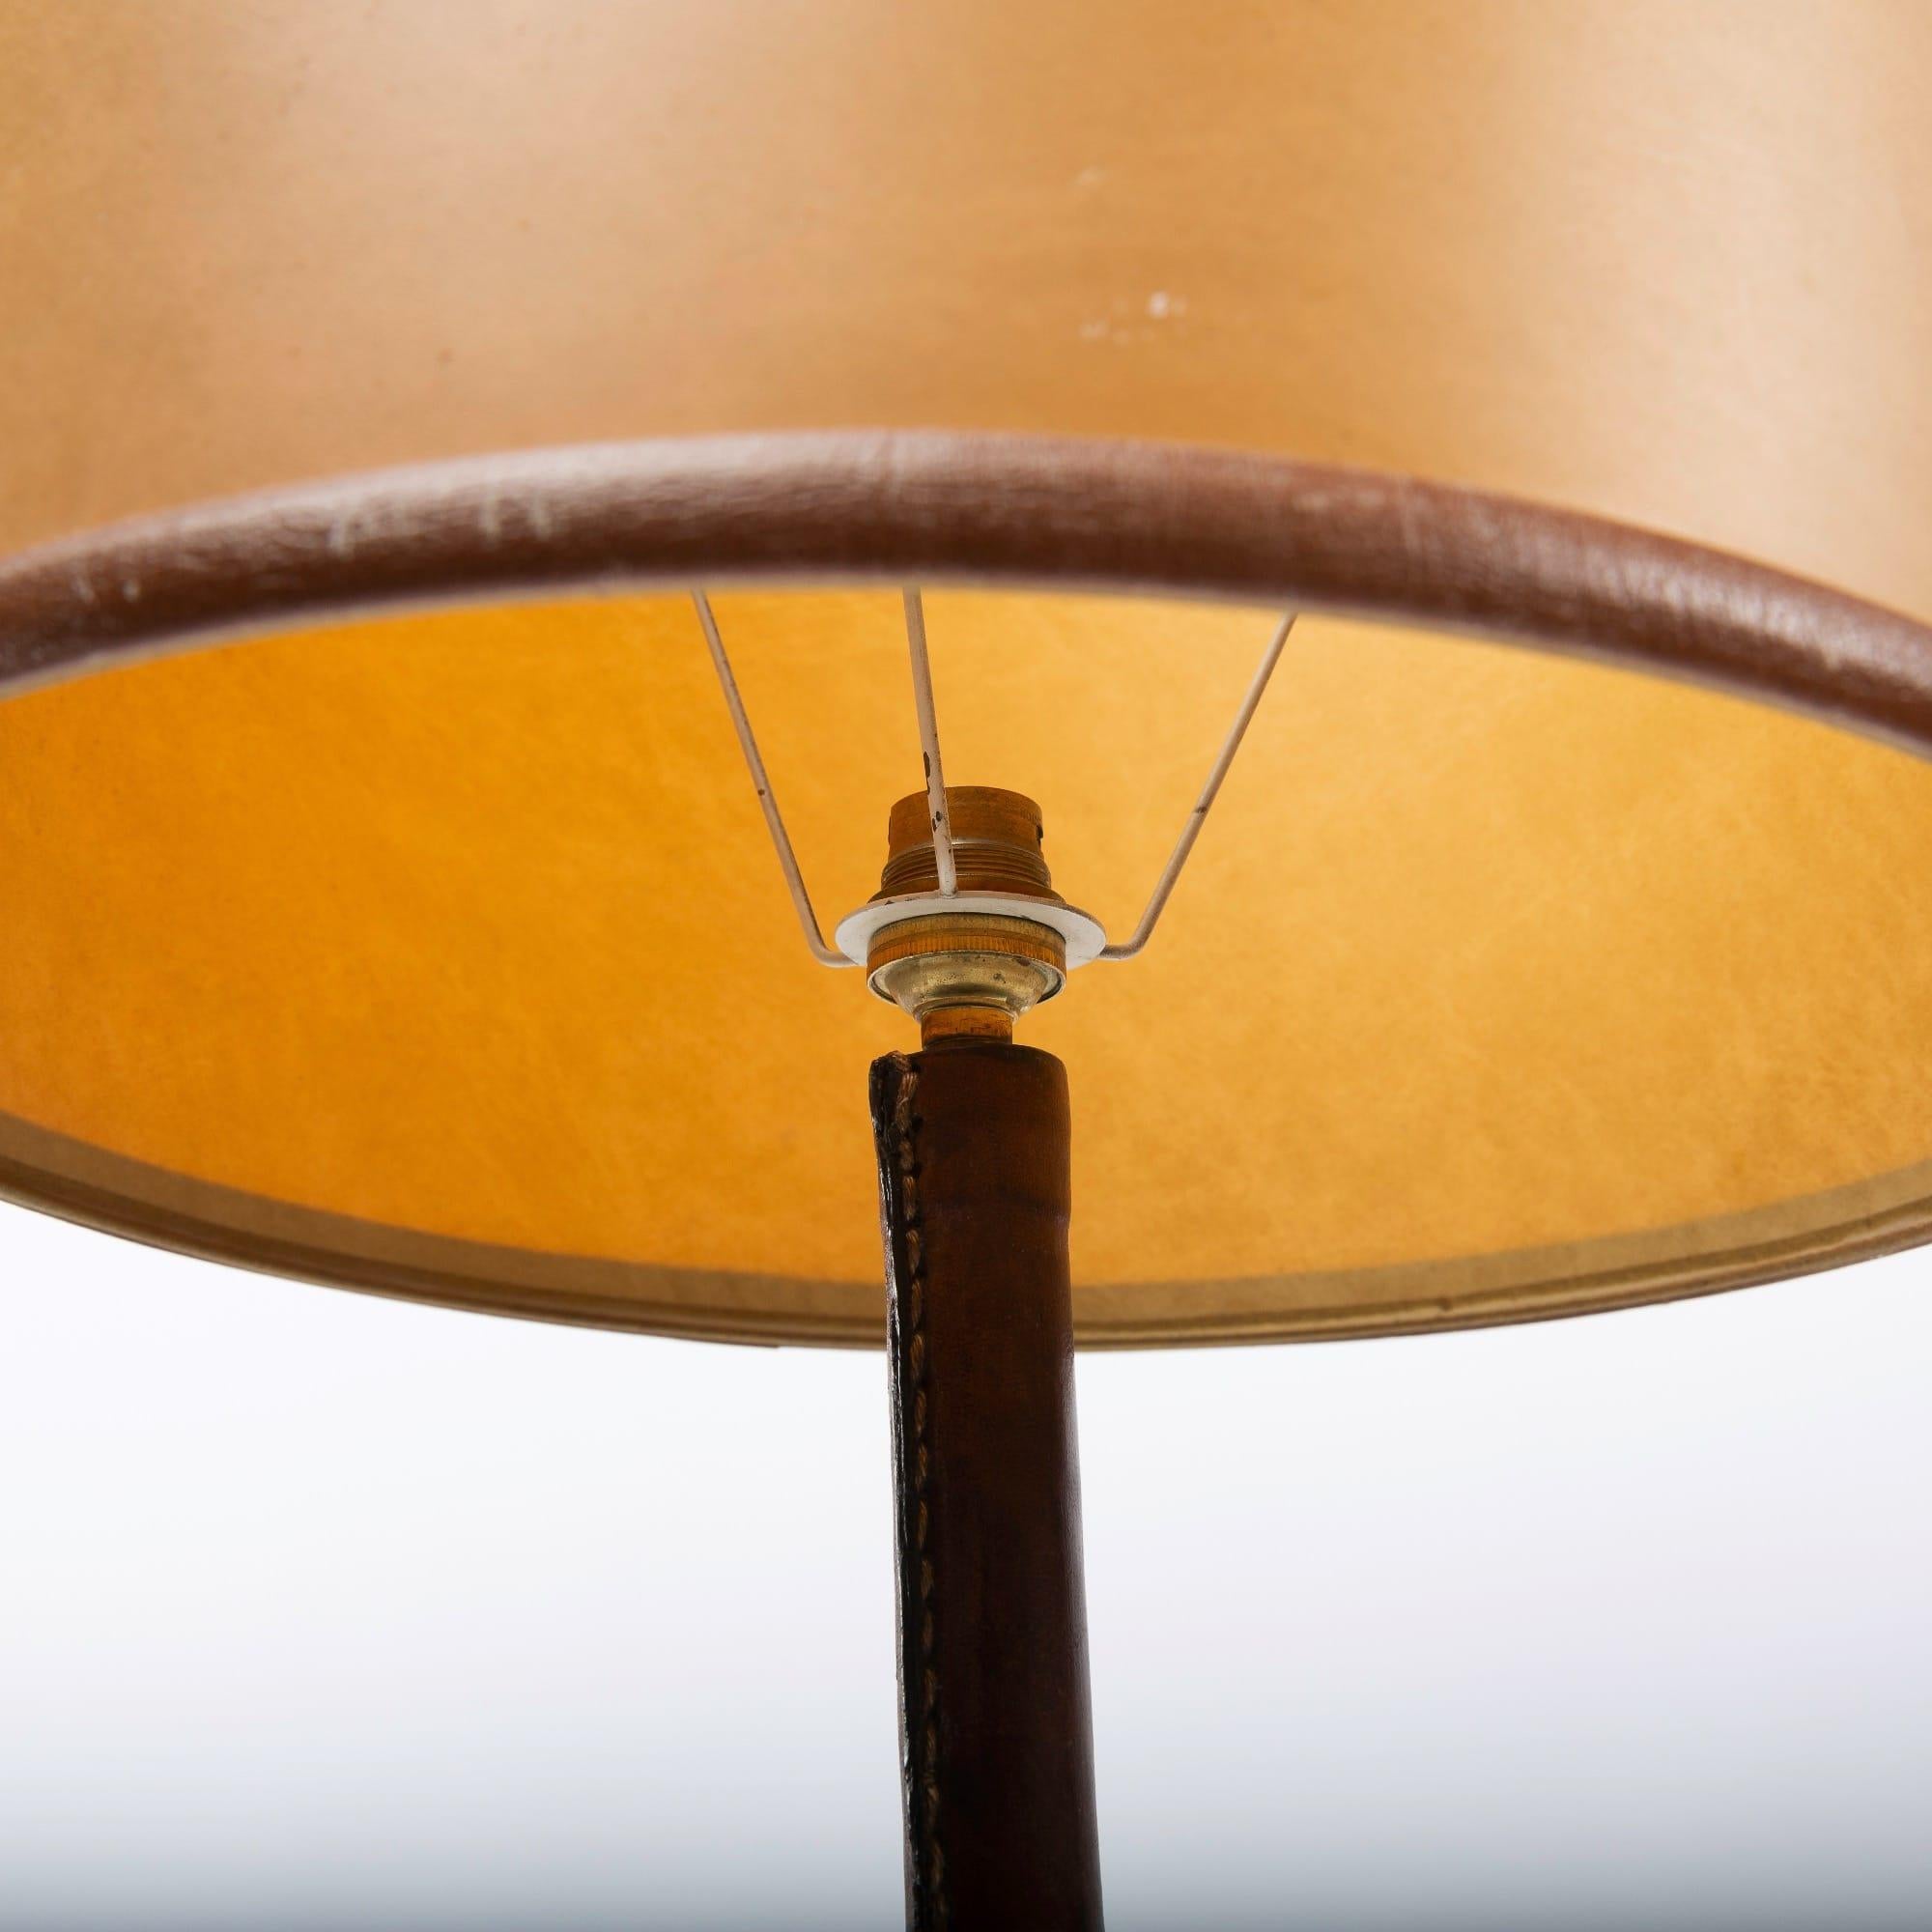 French Midcentury Desk Lamp, Jacques Adnet, Steel, Tan Leather, Brass 1